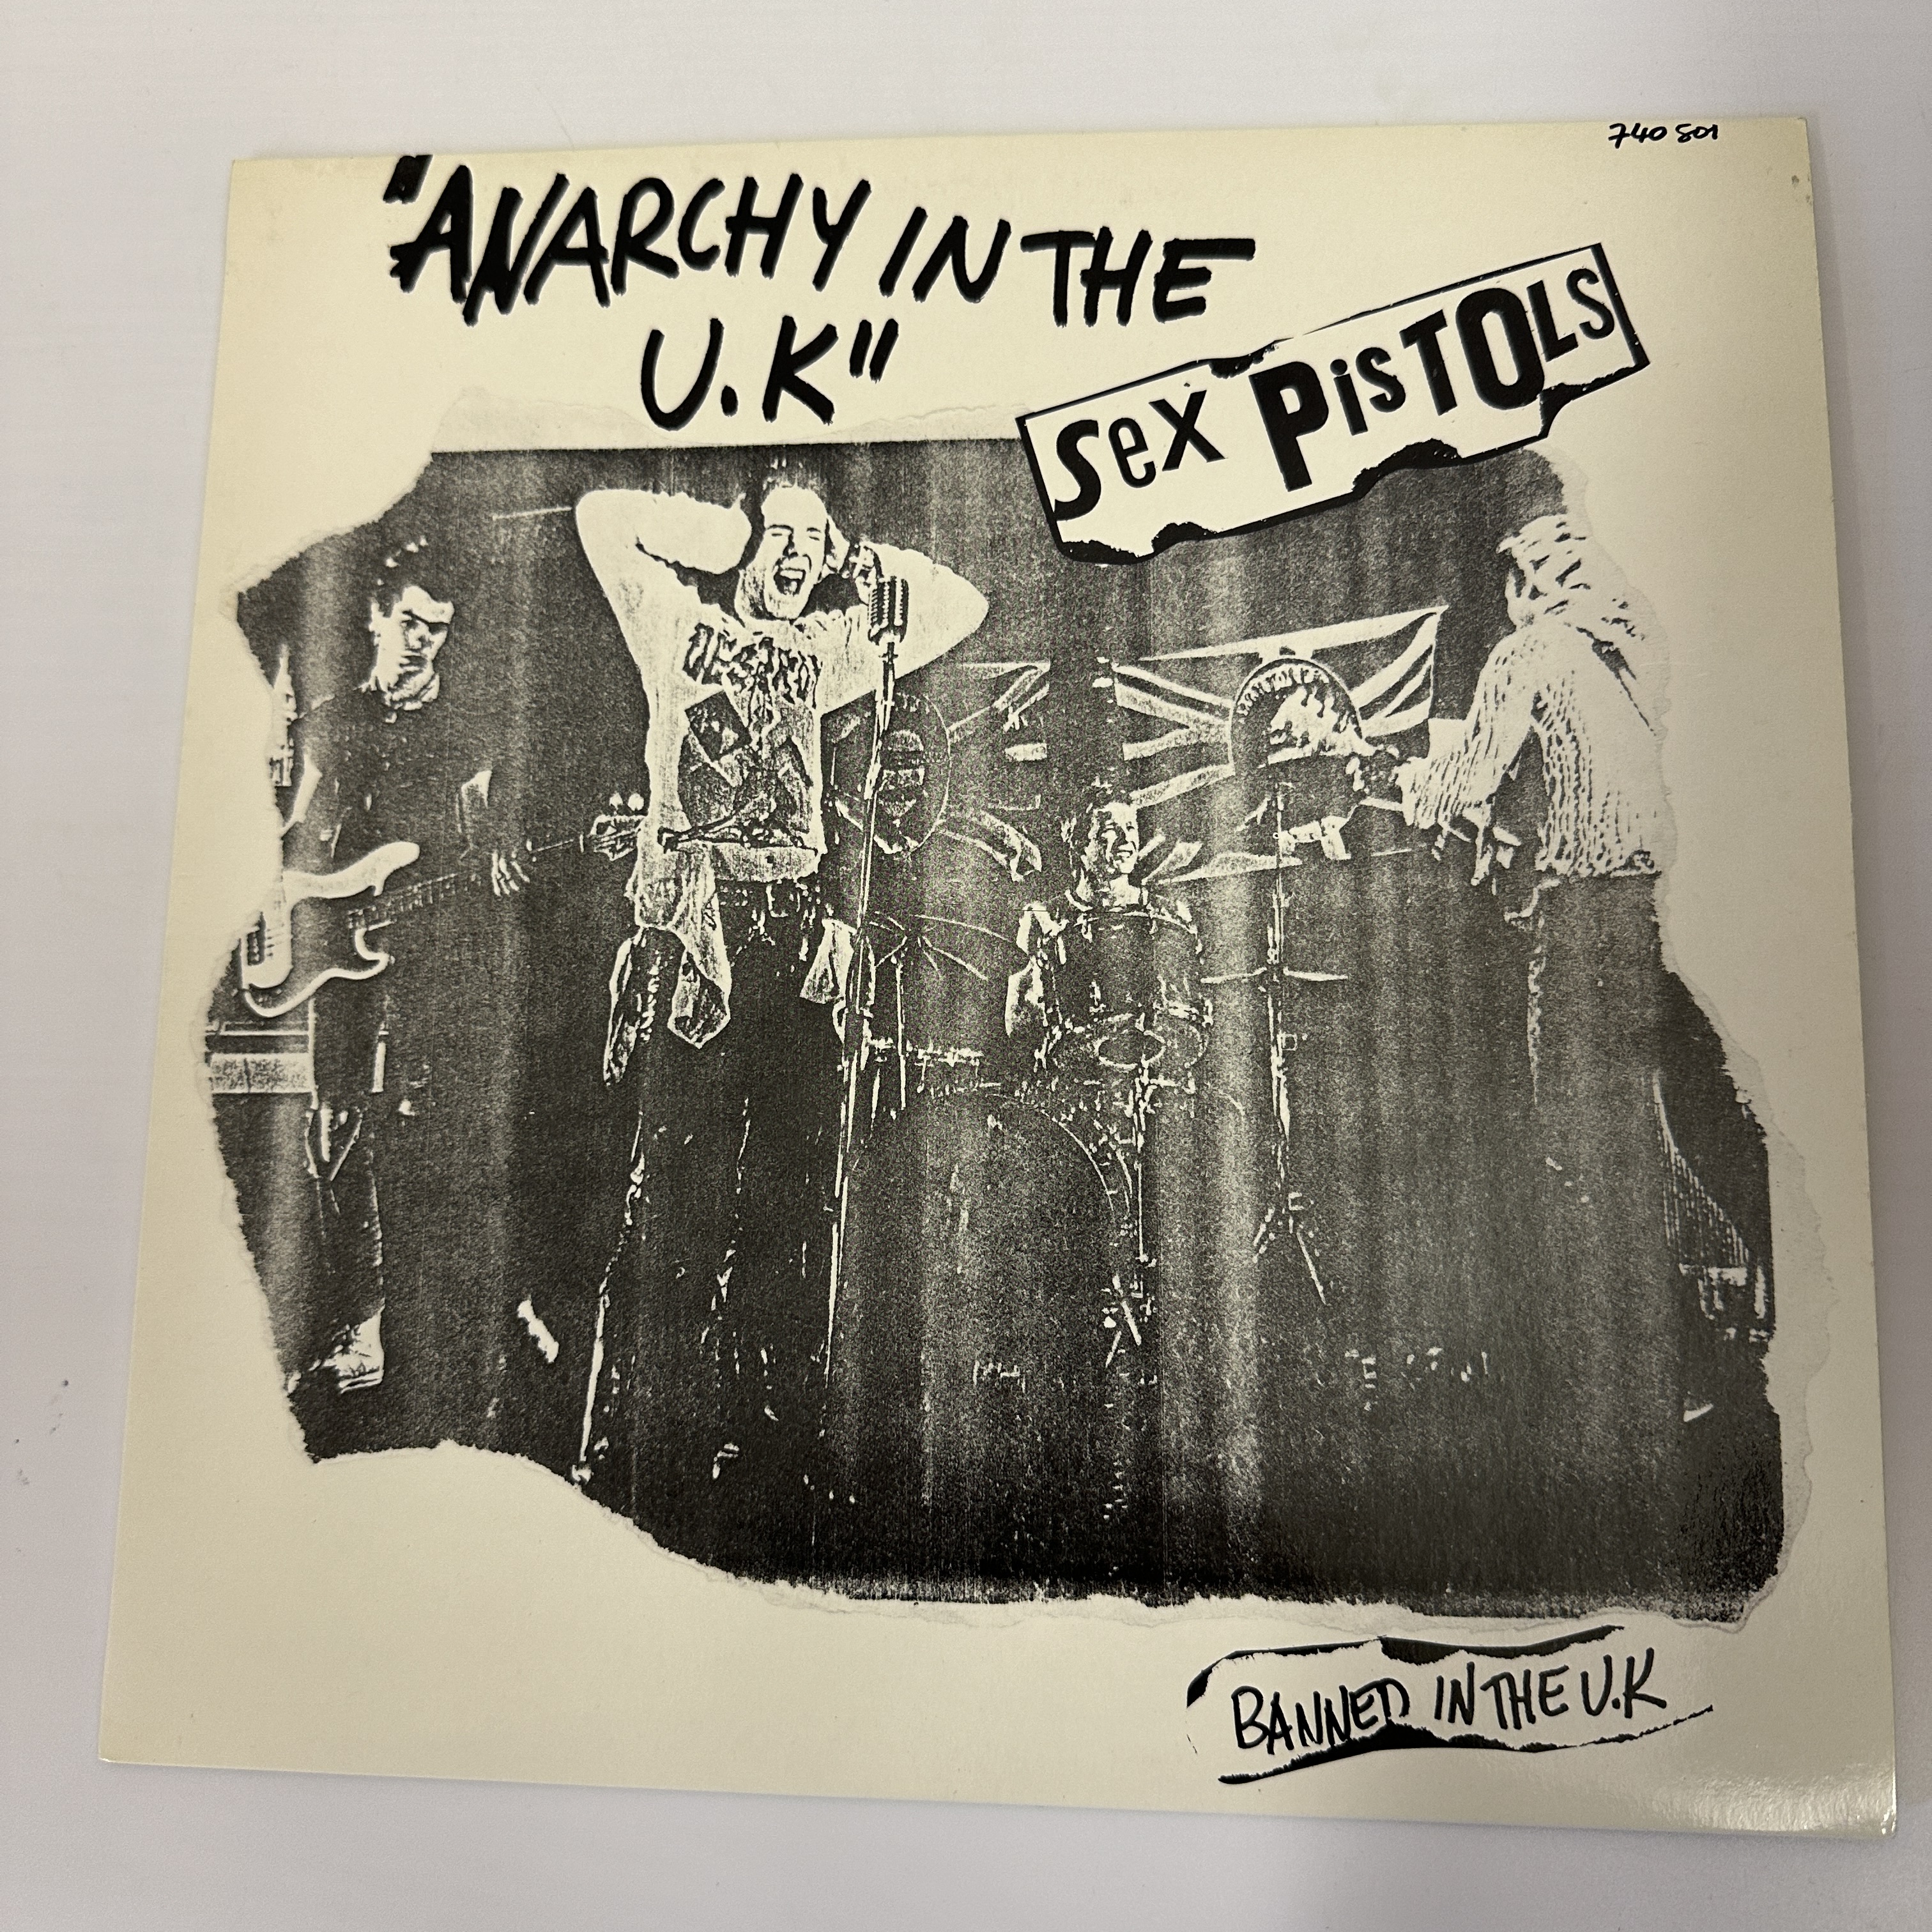 The Sex Pistols - Anarchy In The UK vinyl LP - Image 2 of 8